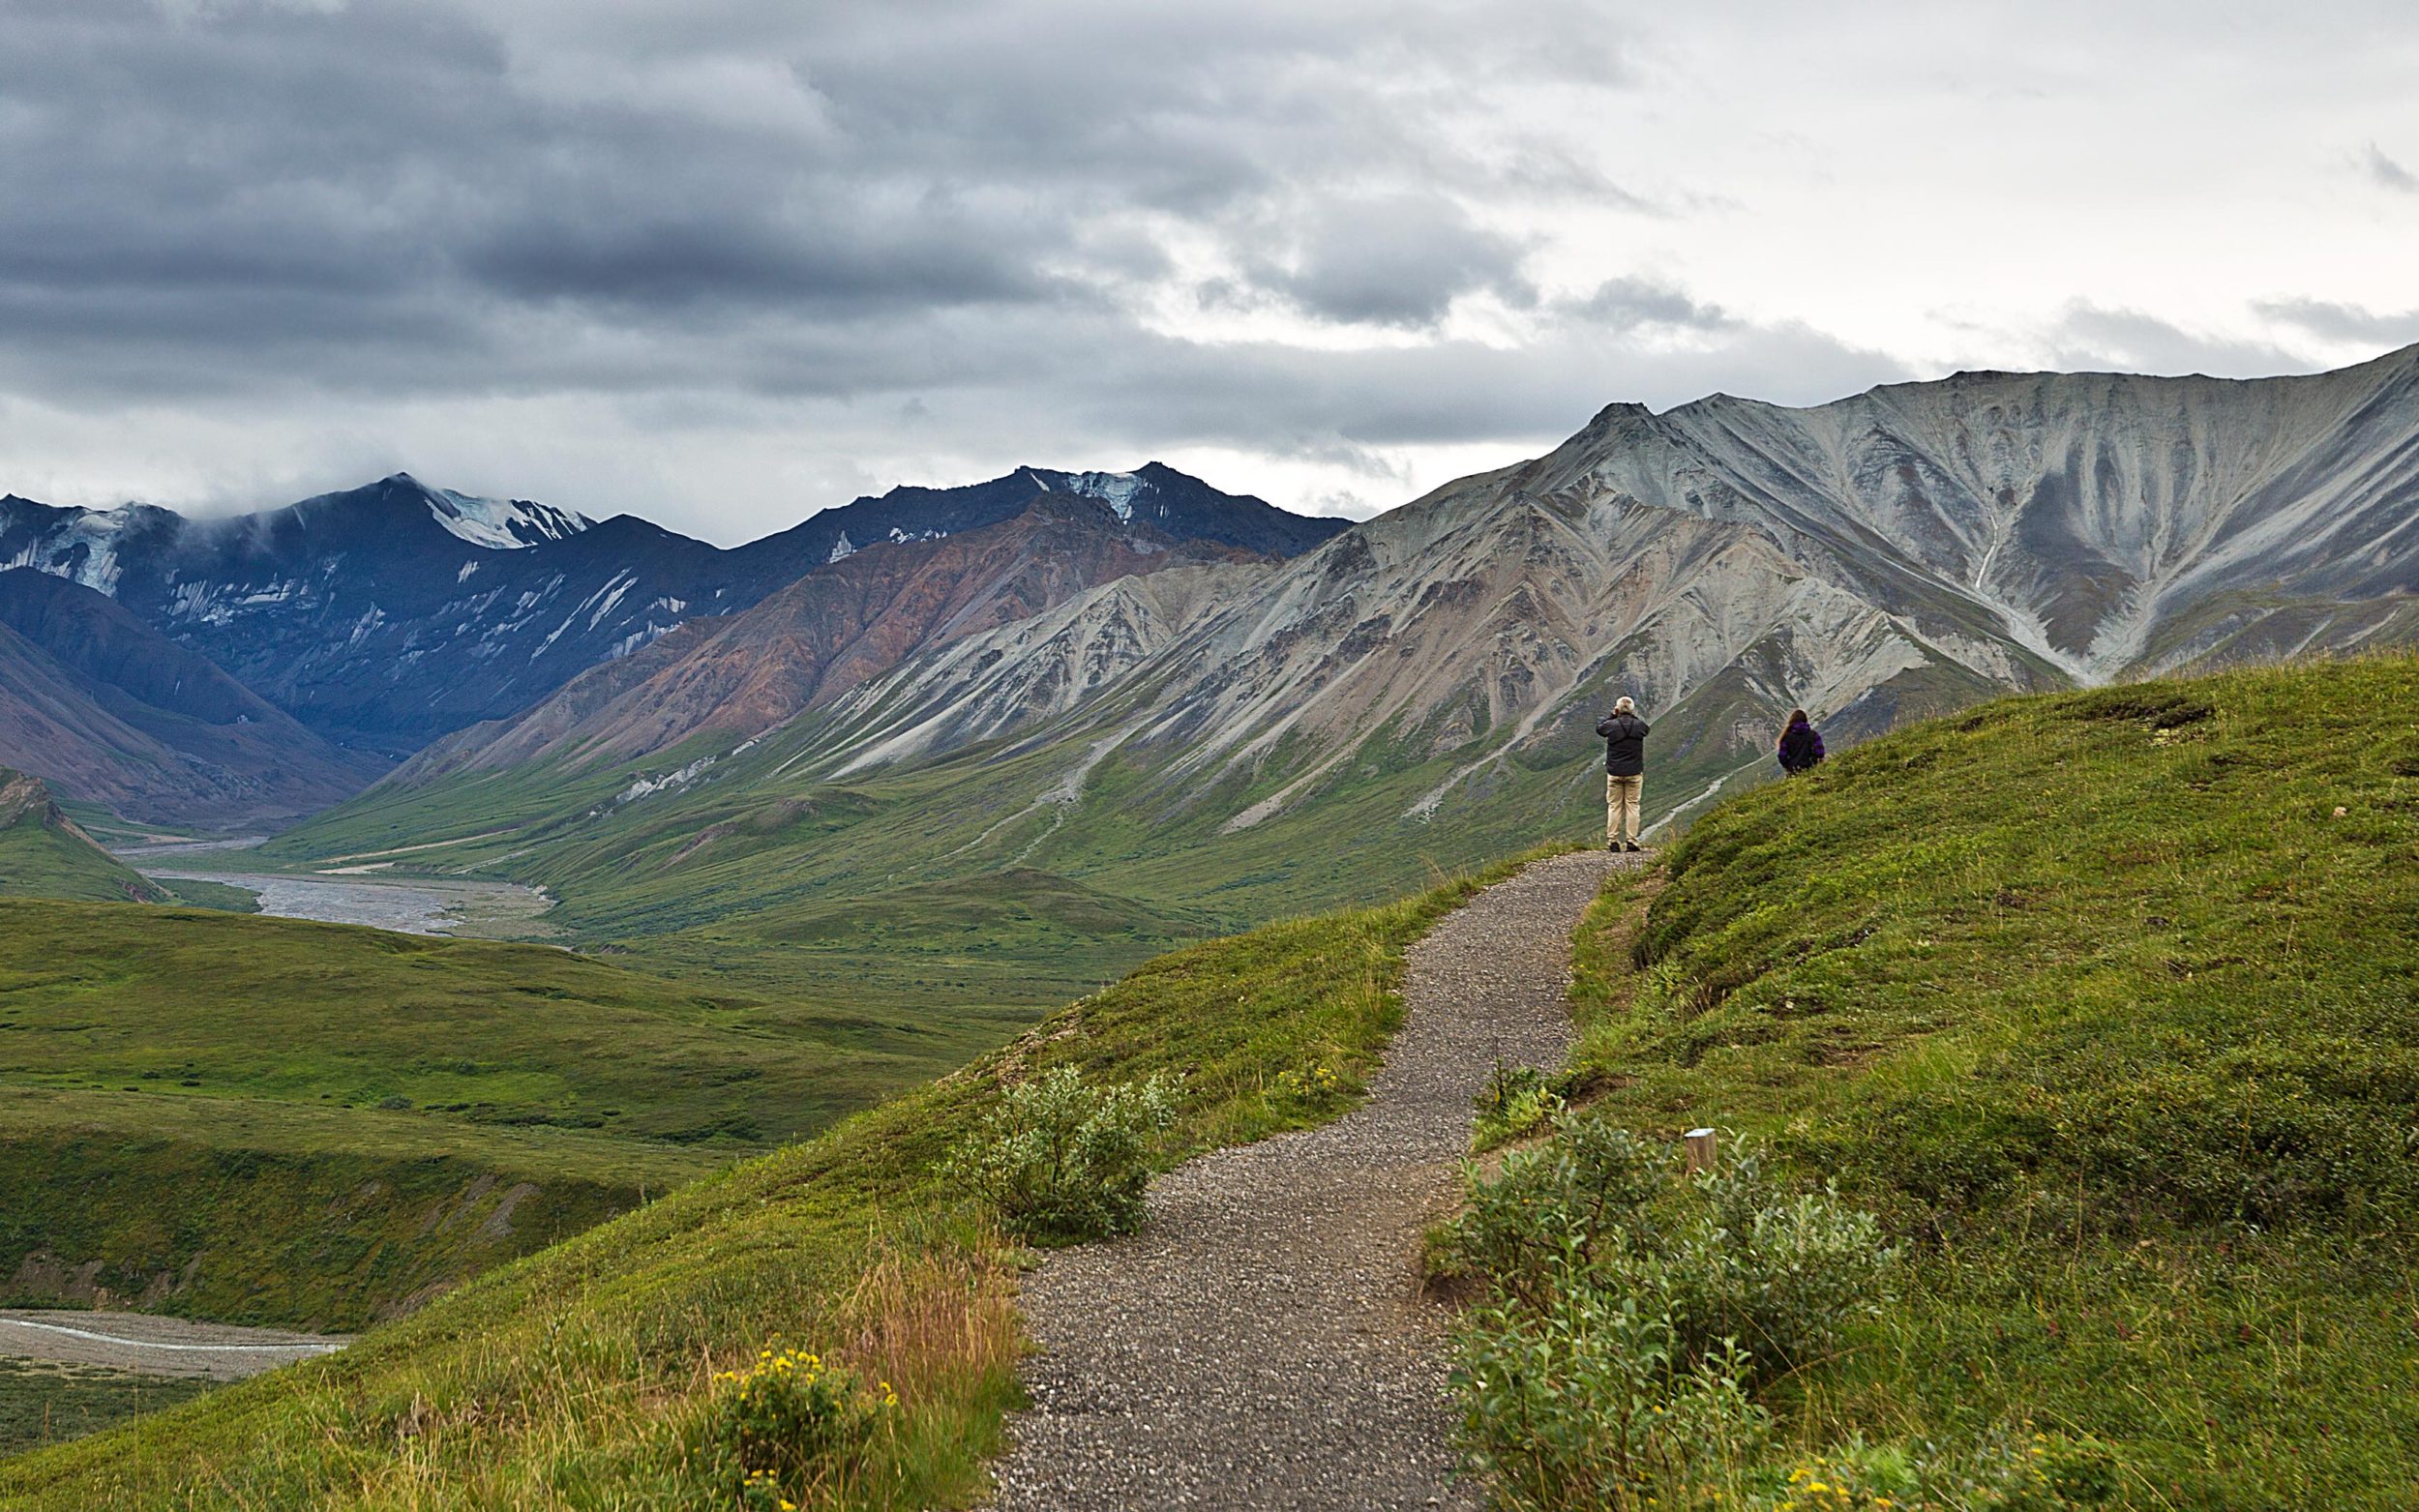 Epic views of Denali from Eielson